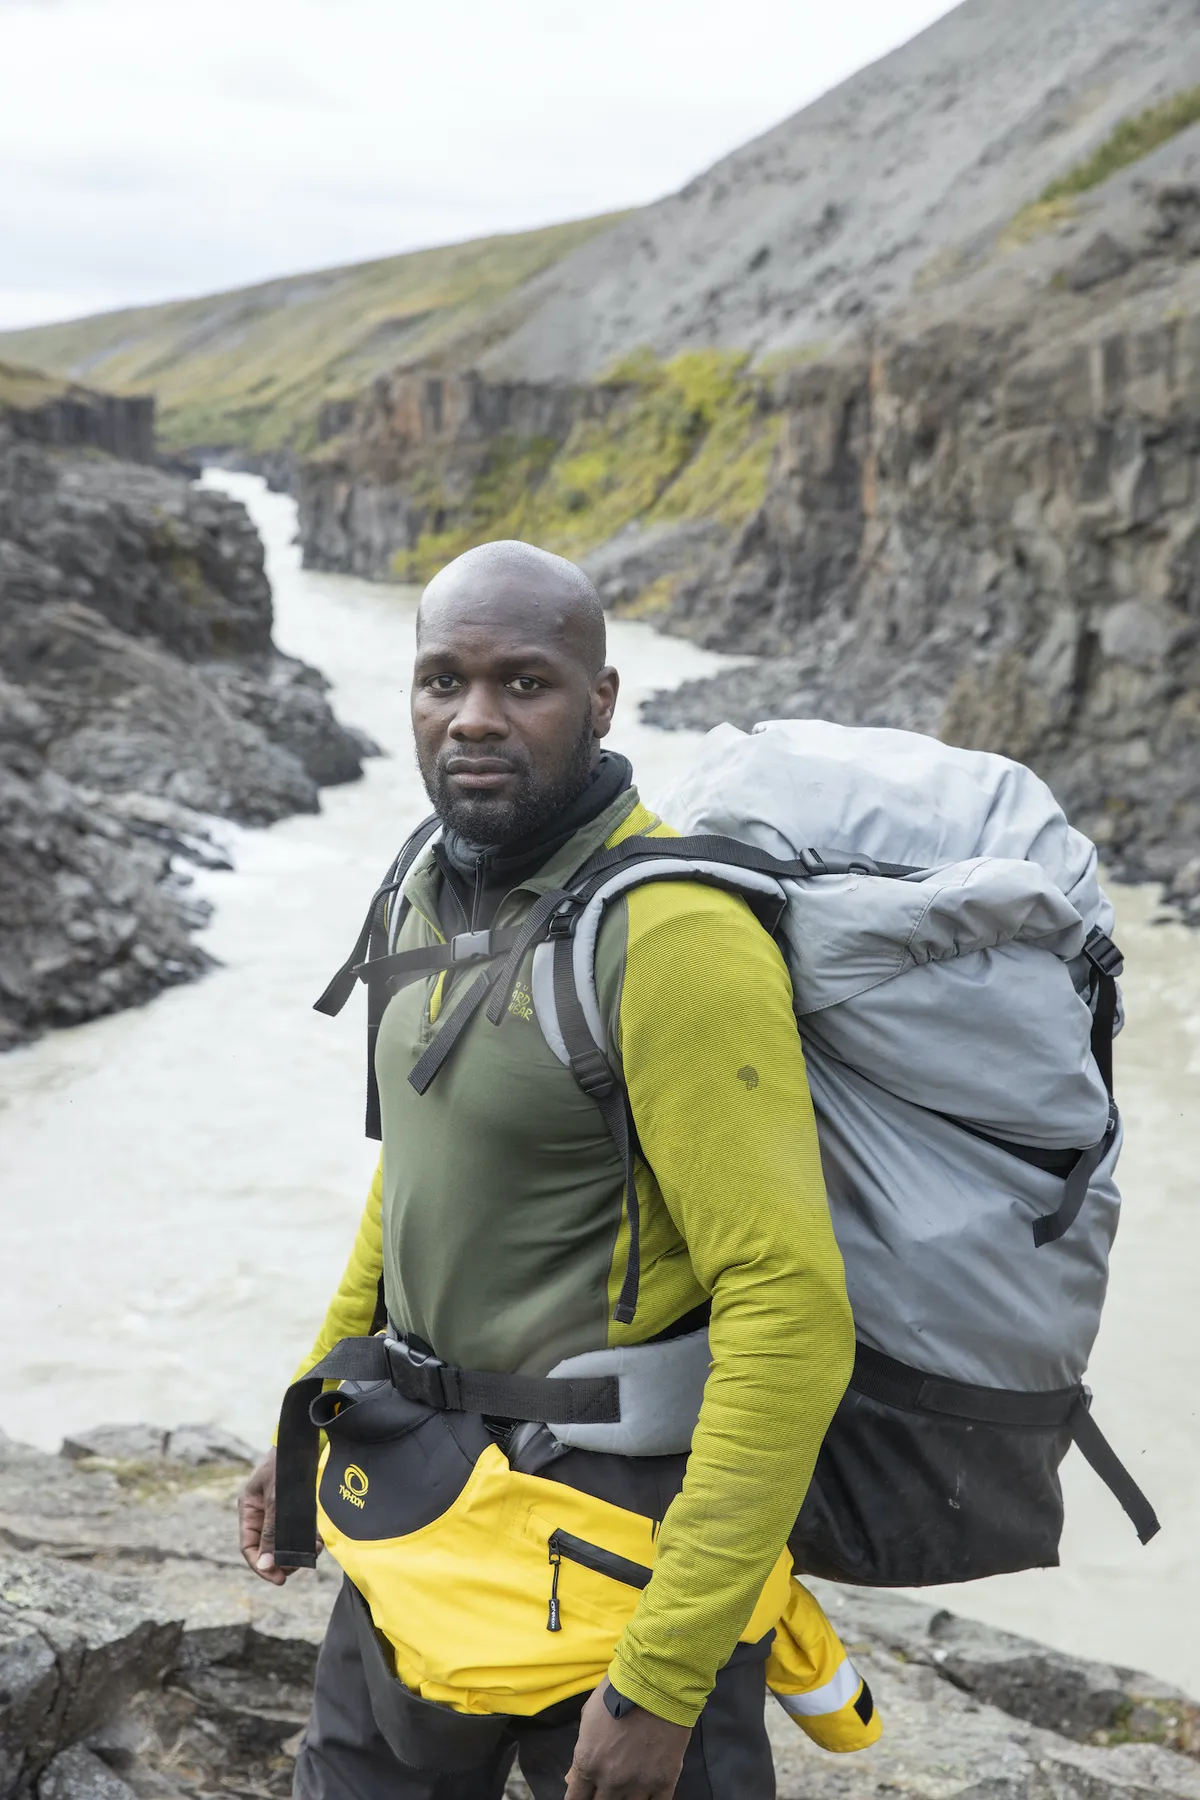 Dwayne Fields looks into the camera, wearing outdoors clothing and a very large rucksack. Behind him, a river cuts through a gorge.